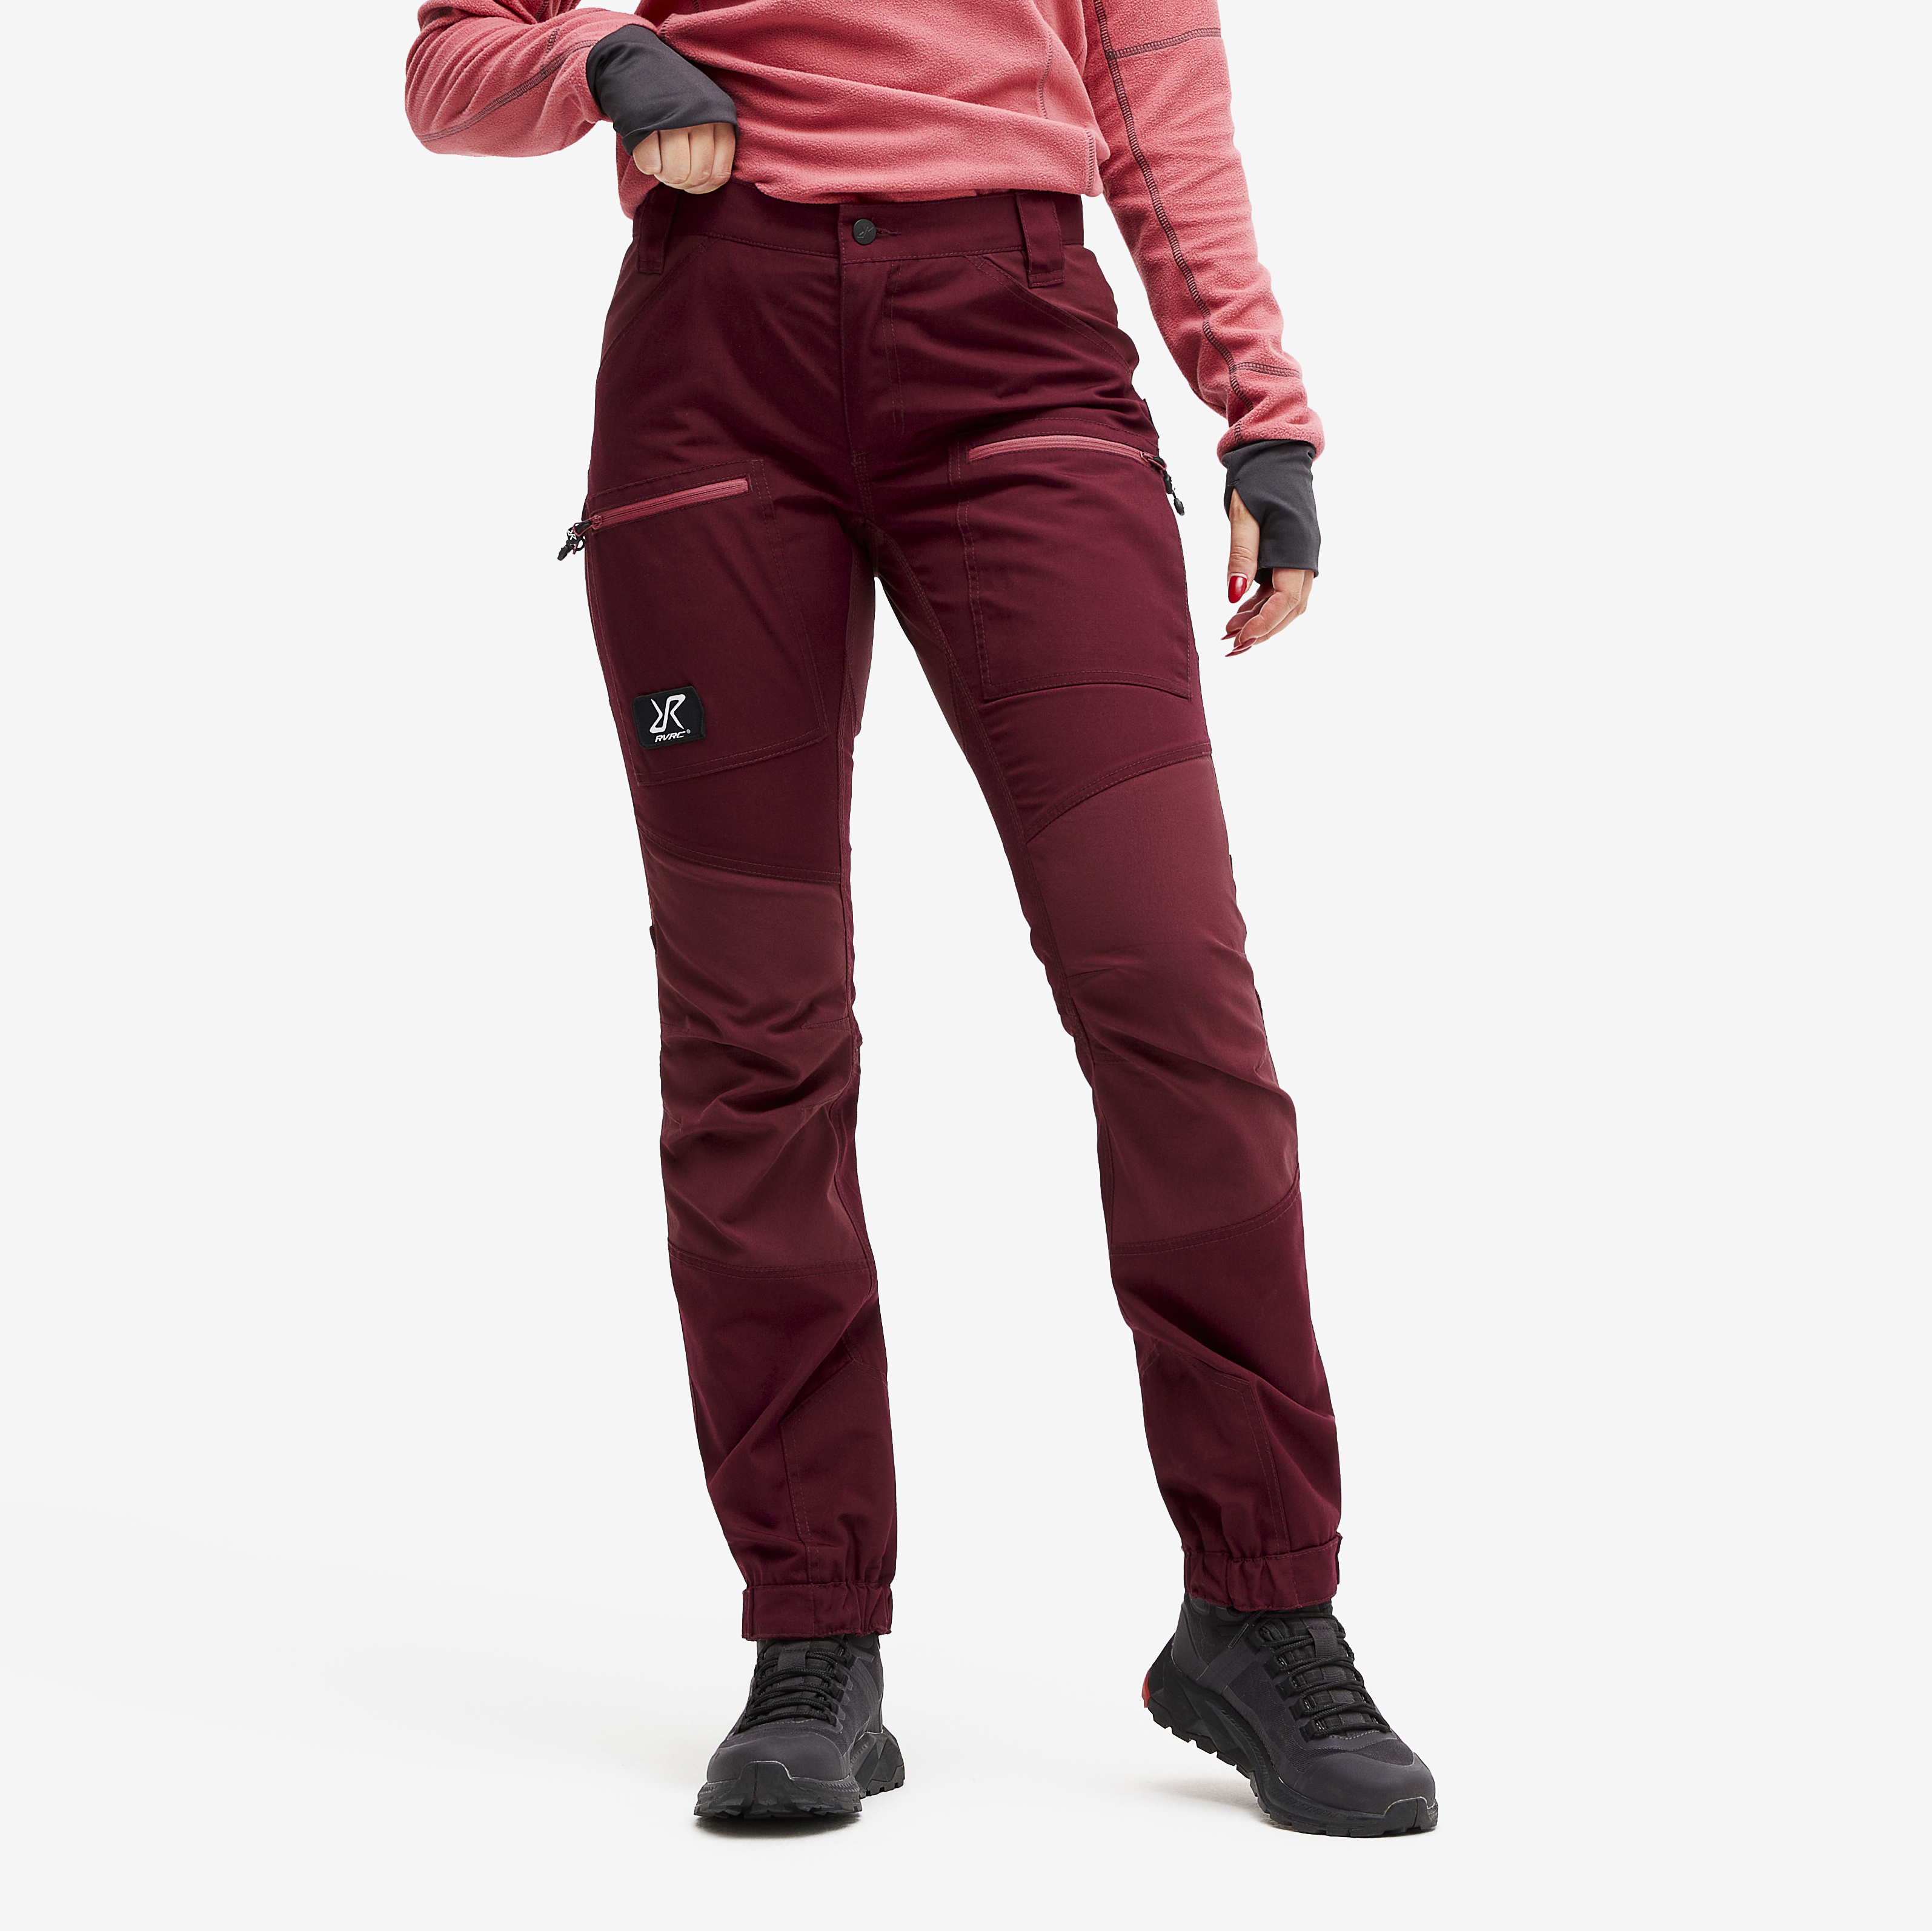 Nordwand Pro Pants Burgundy/Earth Red